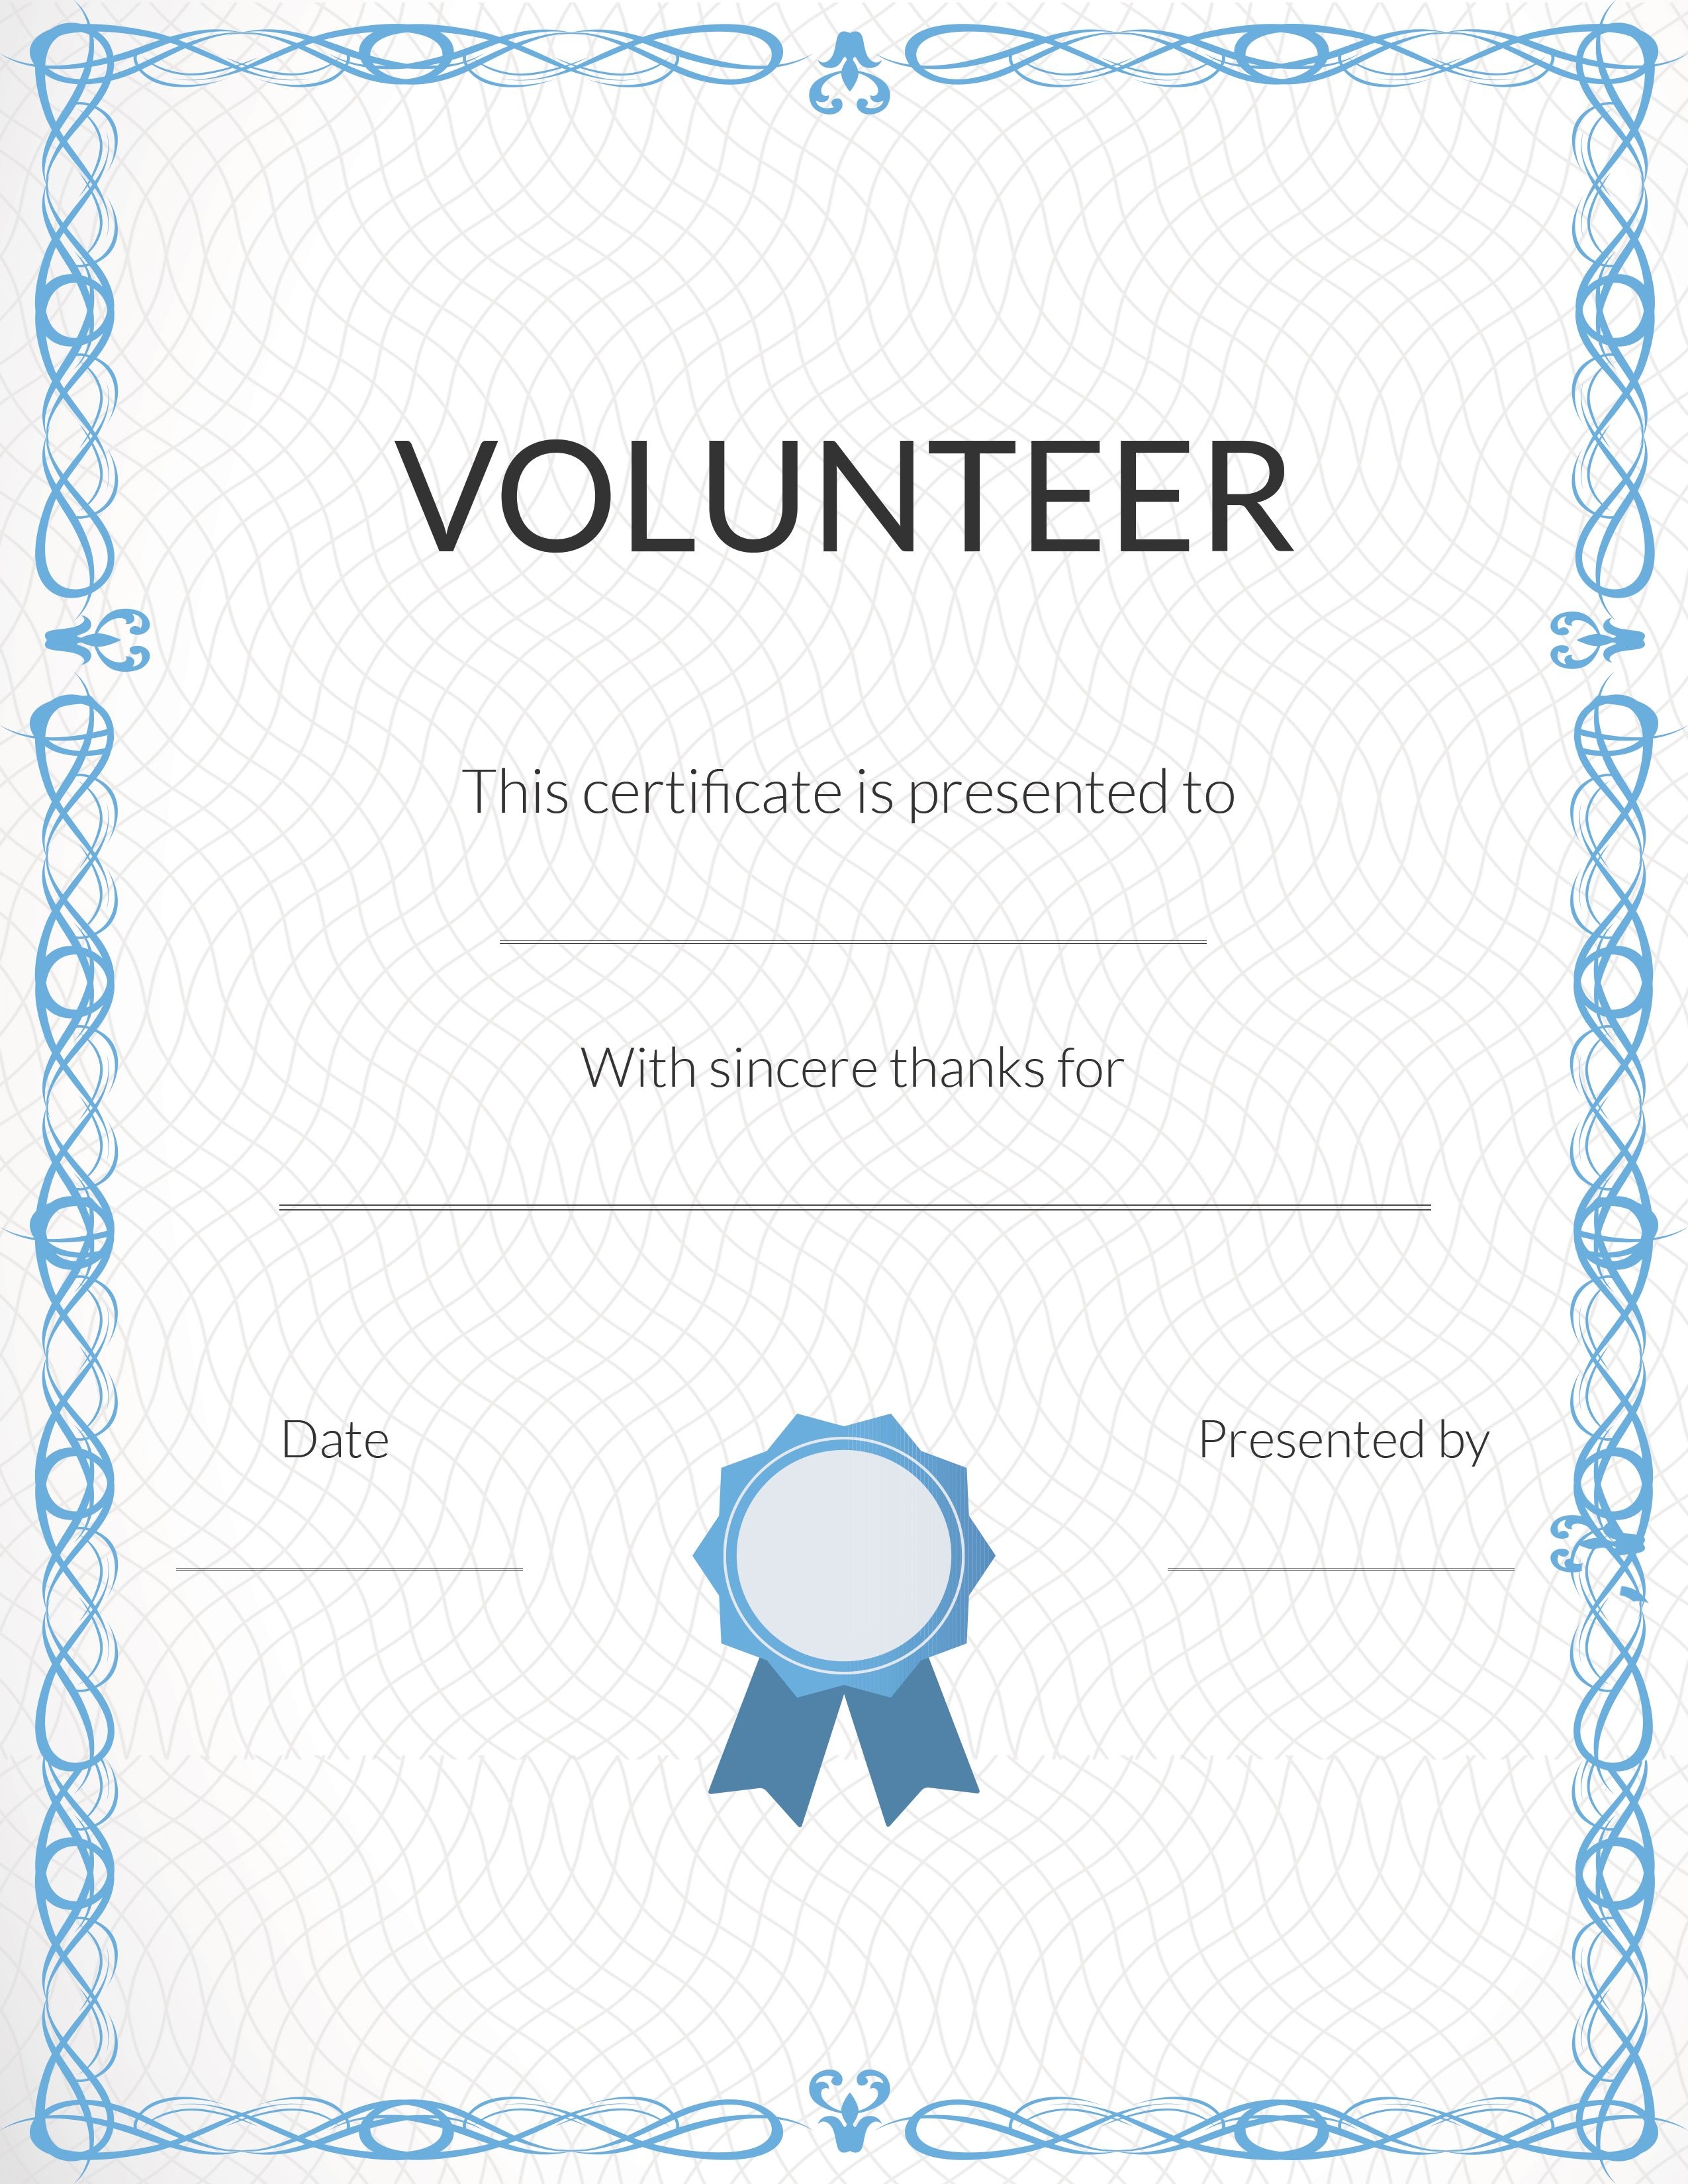 30 Free Certificate Of Appreciation Templates And Letters Free Printable Volunteer